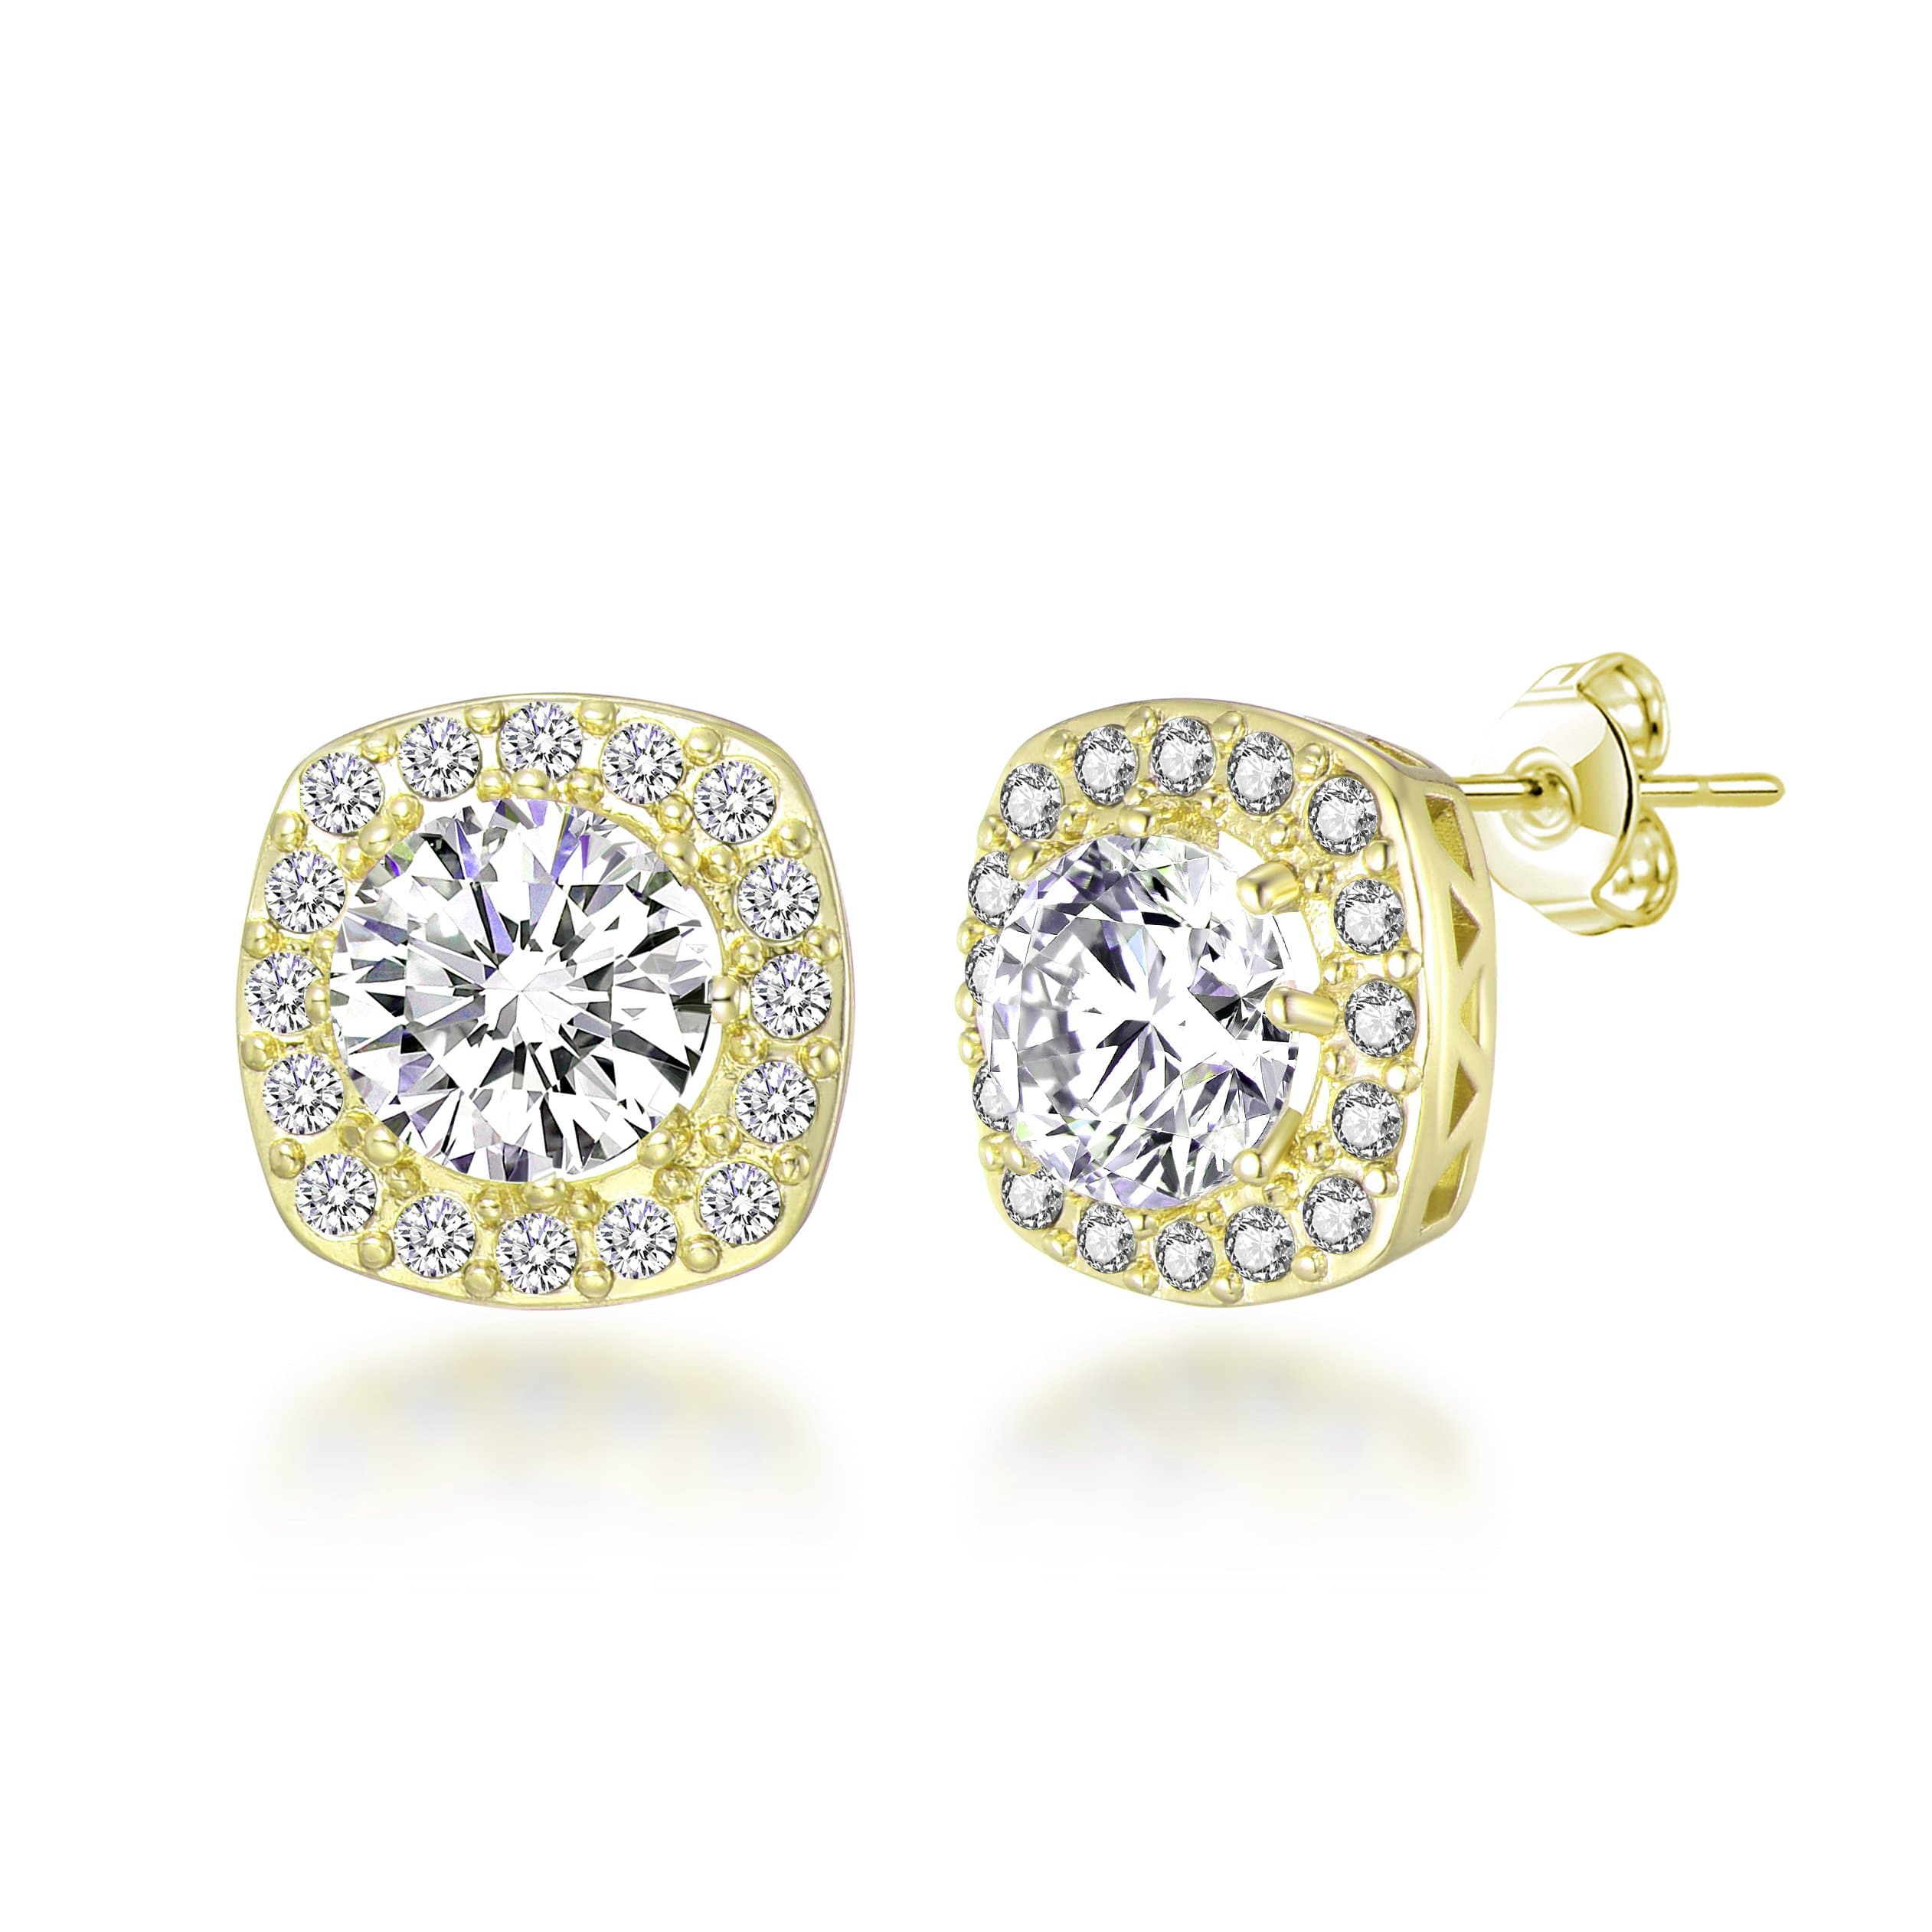 Gold Plated Square Halo Earrings Created with Zircondia® Crystals by Philip Jones Jewellery